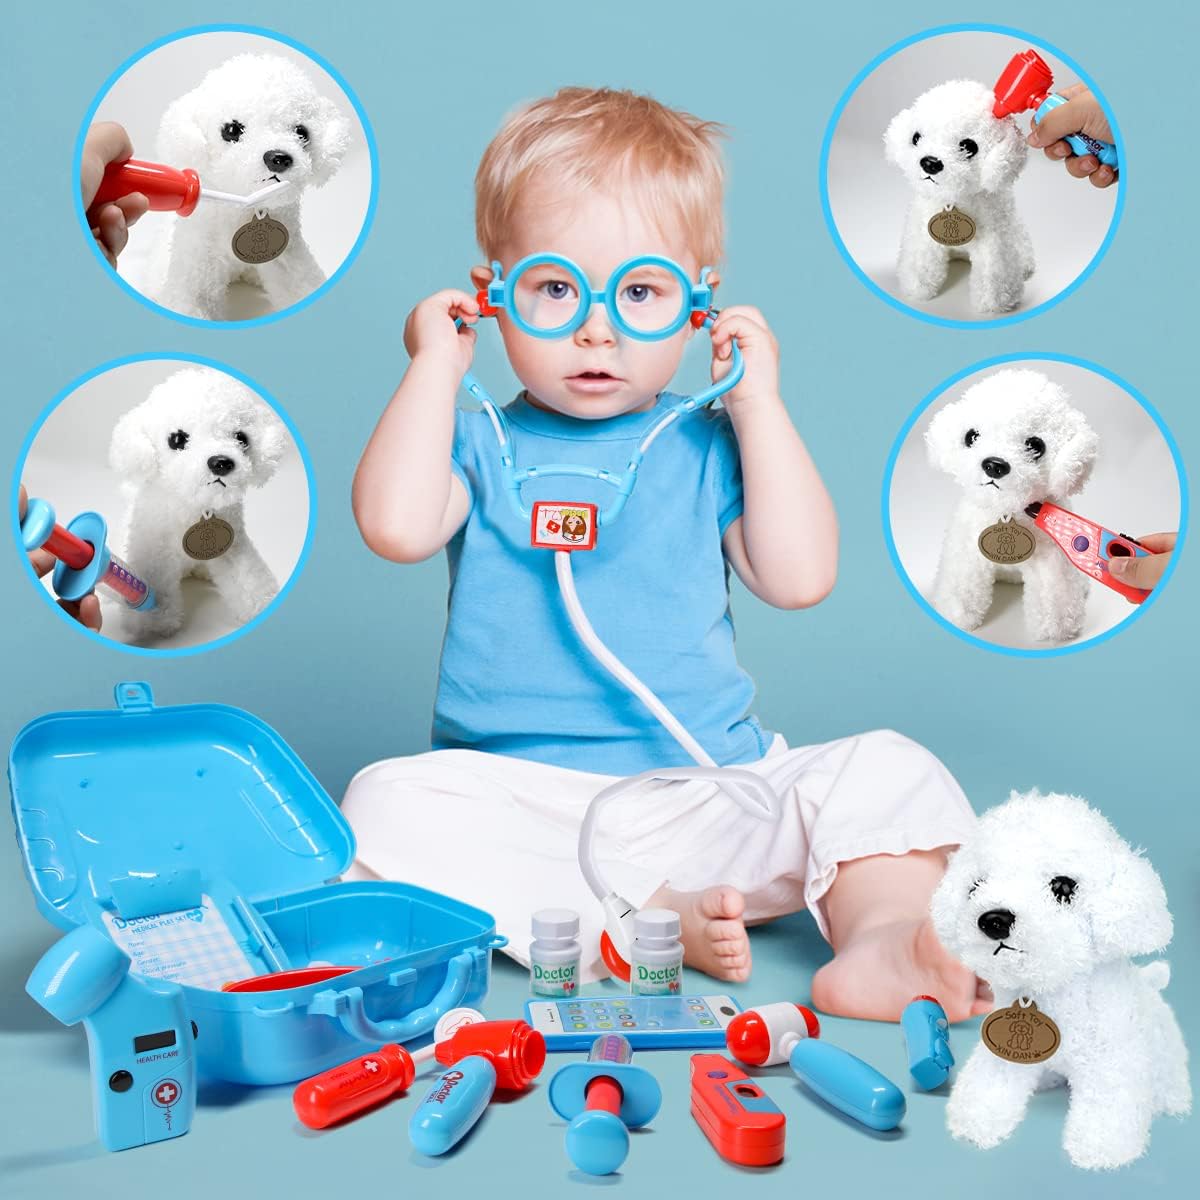 You are currently viewing Meland Toy Doctor Kit Review